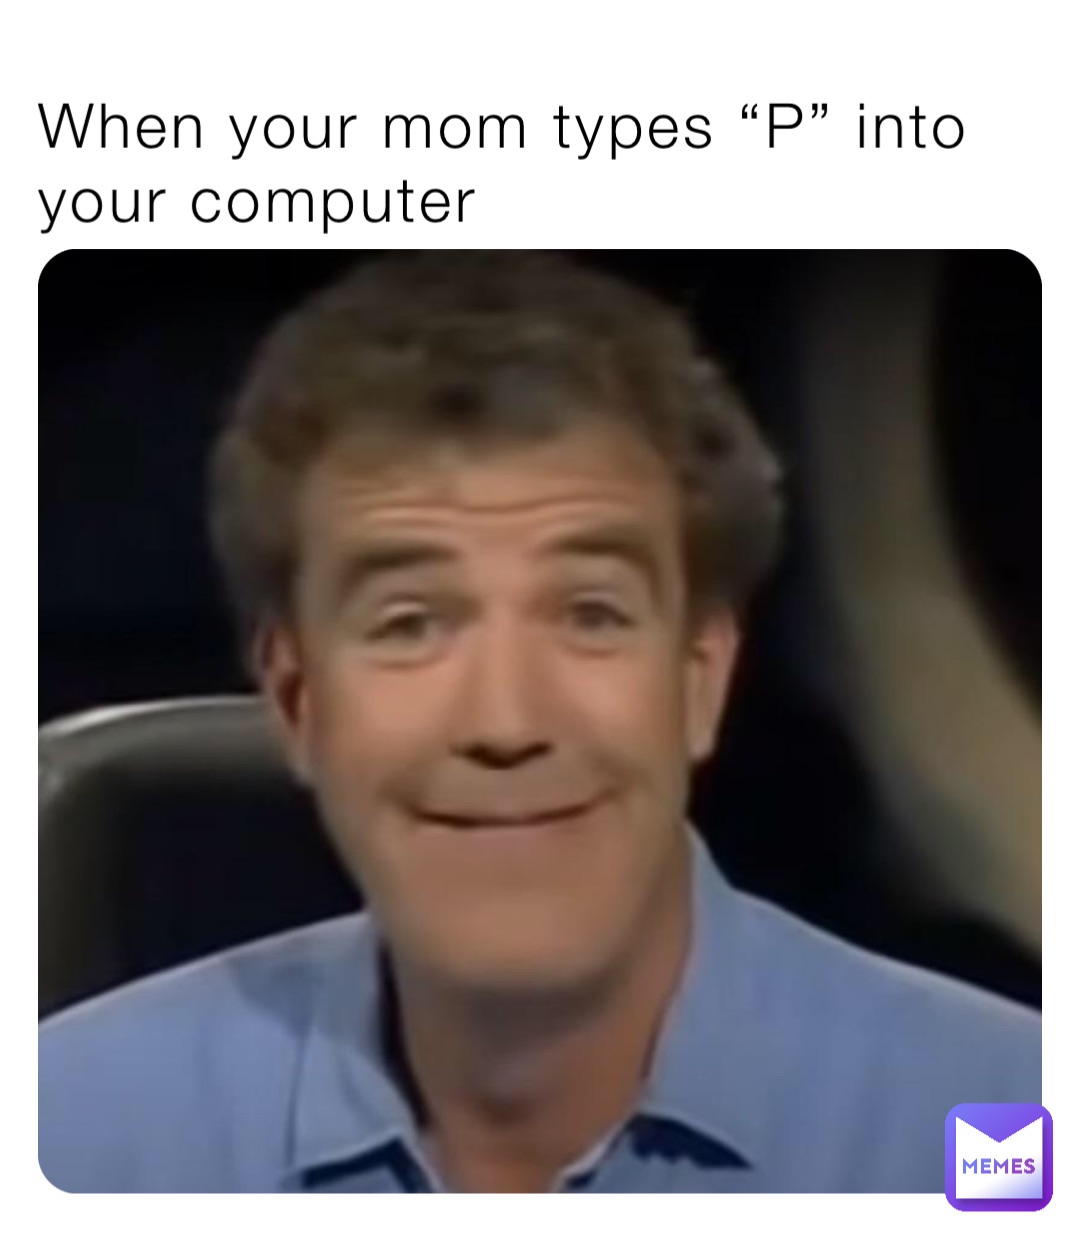 When your mom types “P” into your computer